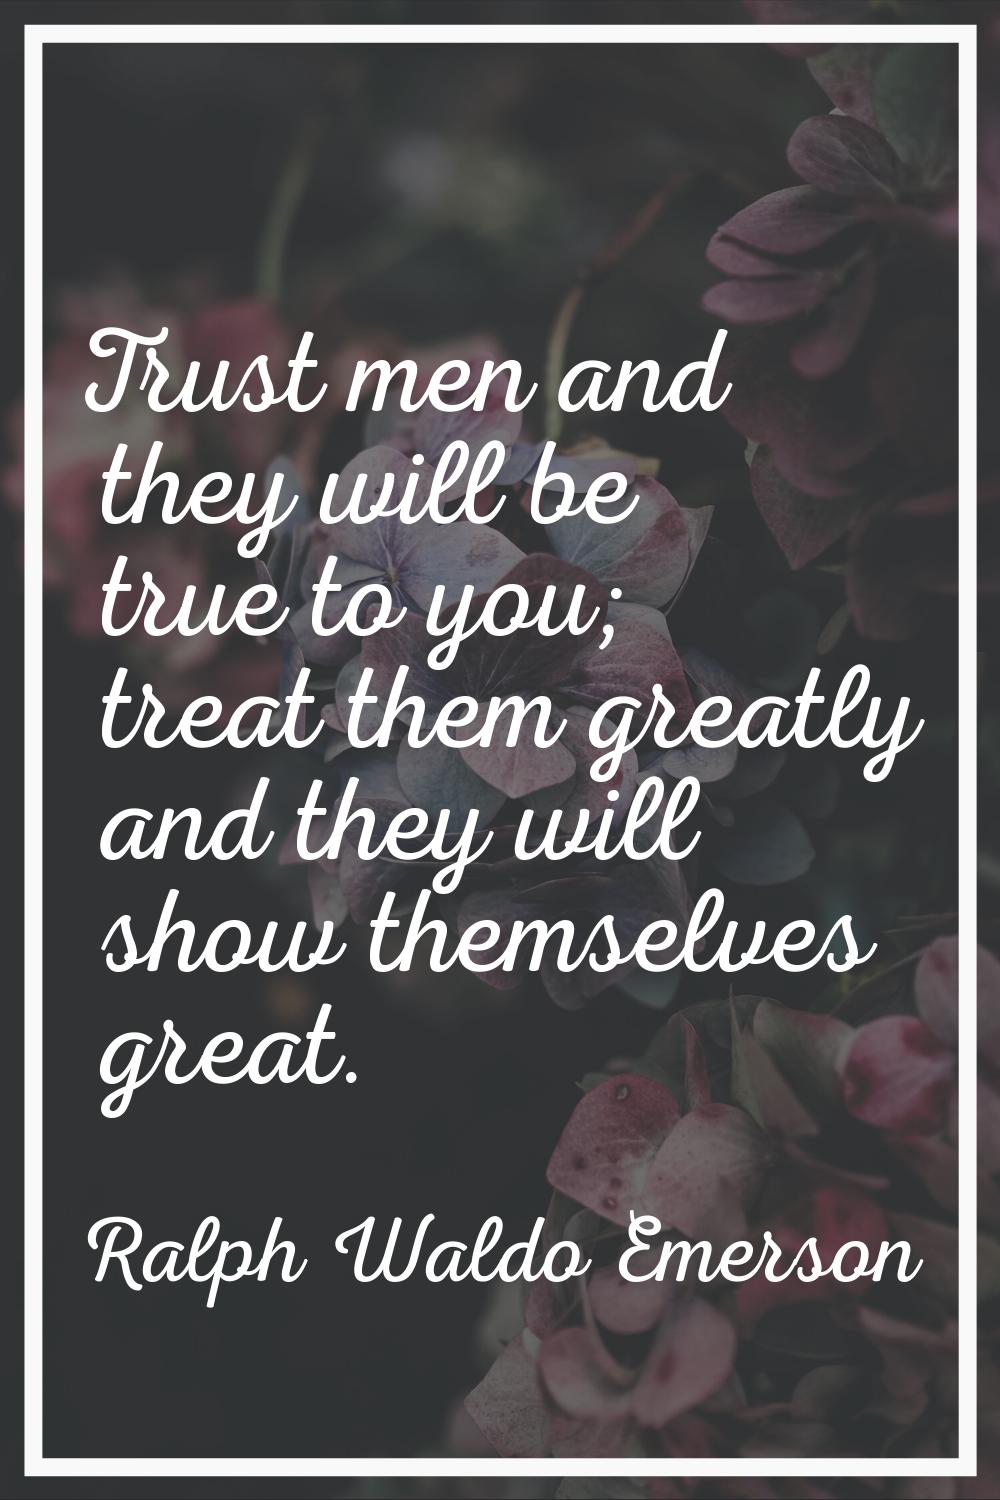 Trust men and they will be true to you; treat them greatly and they will show themselves great.